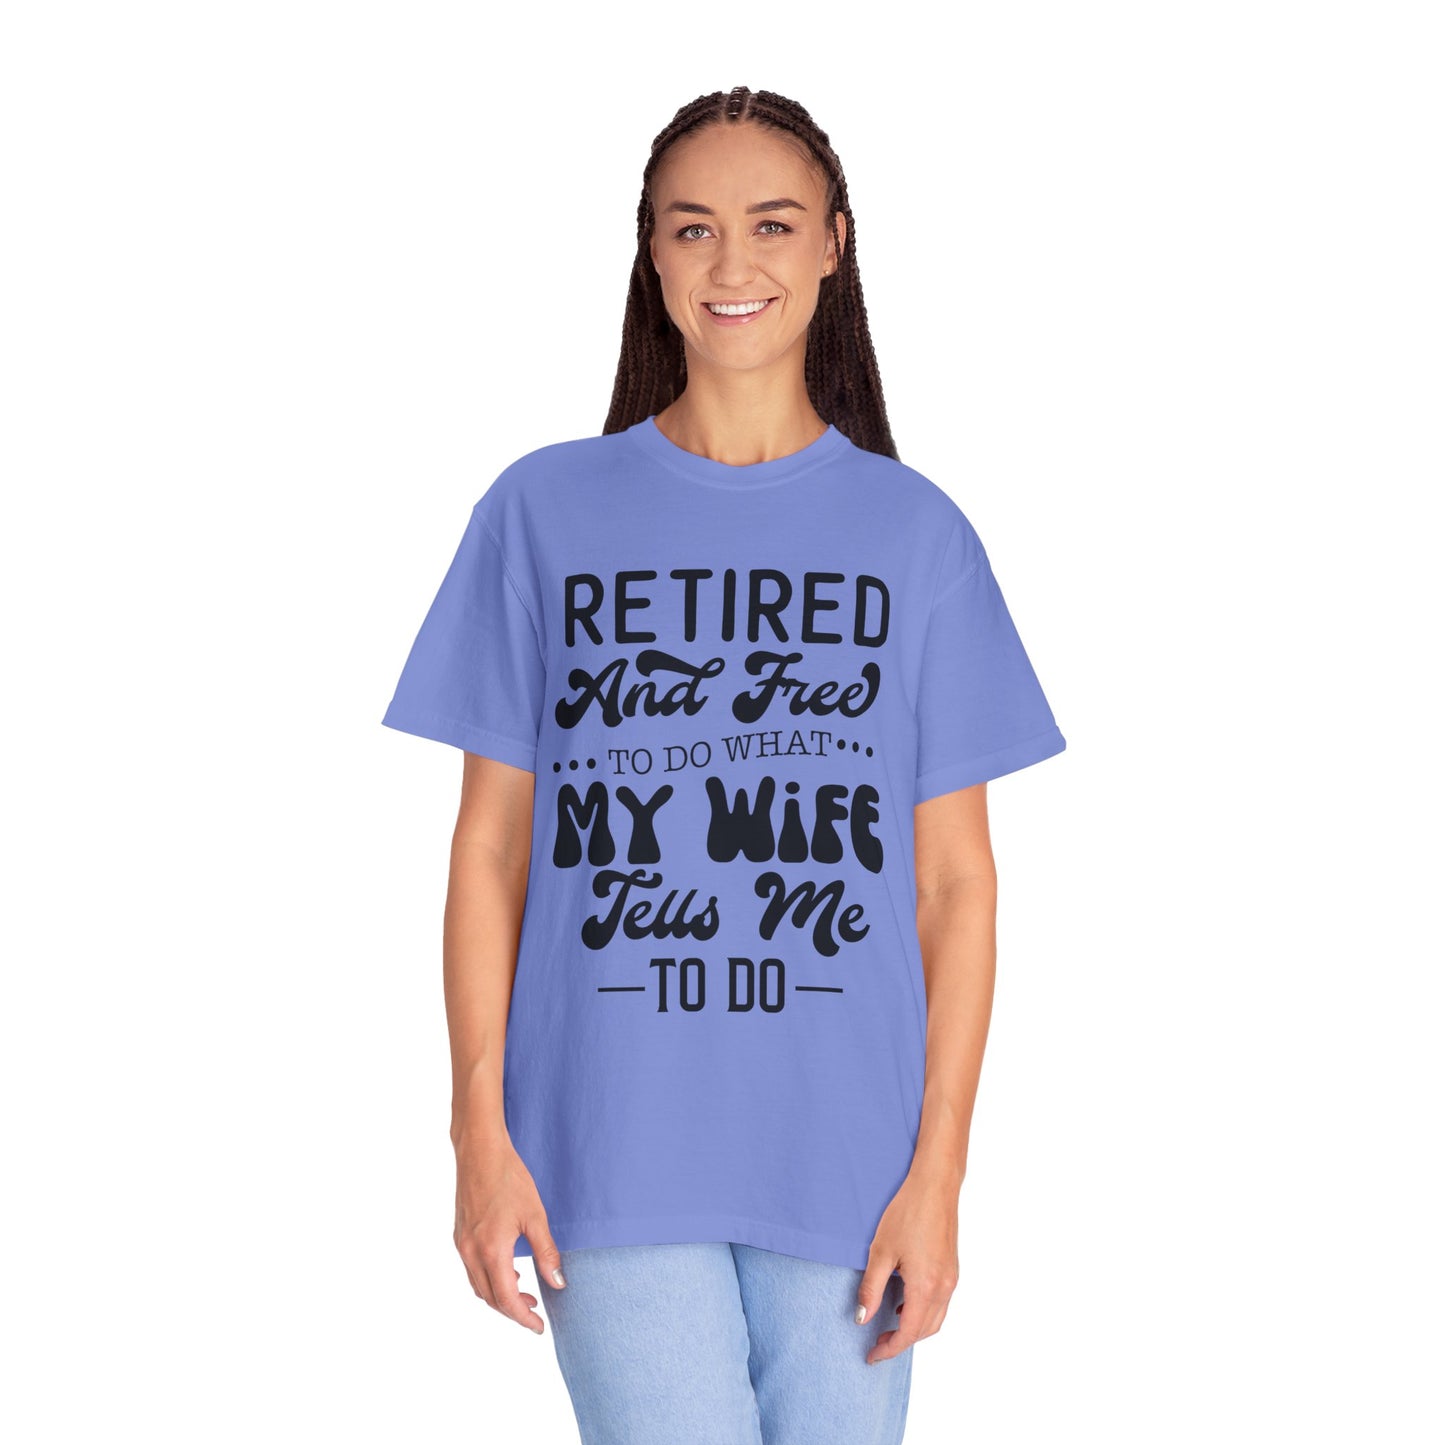 Retire and Free - Unisex Garment-Dyed T-shirt